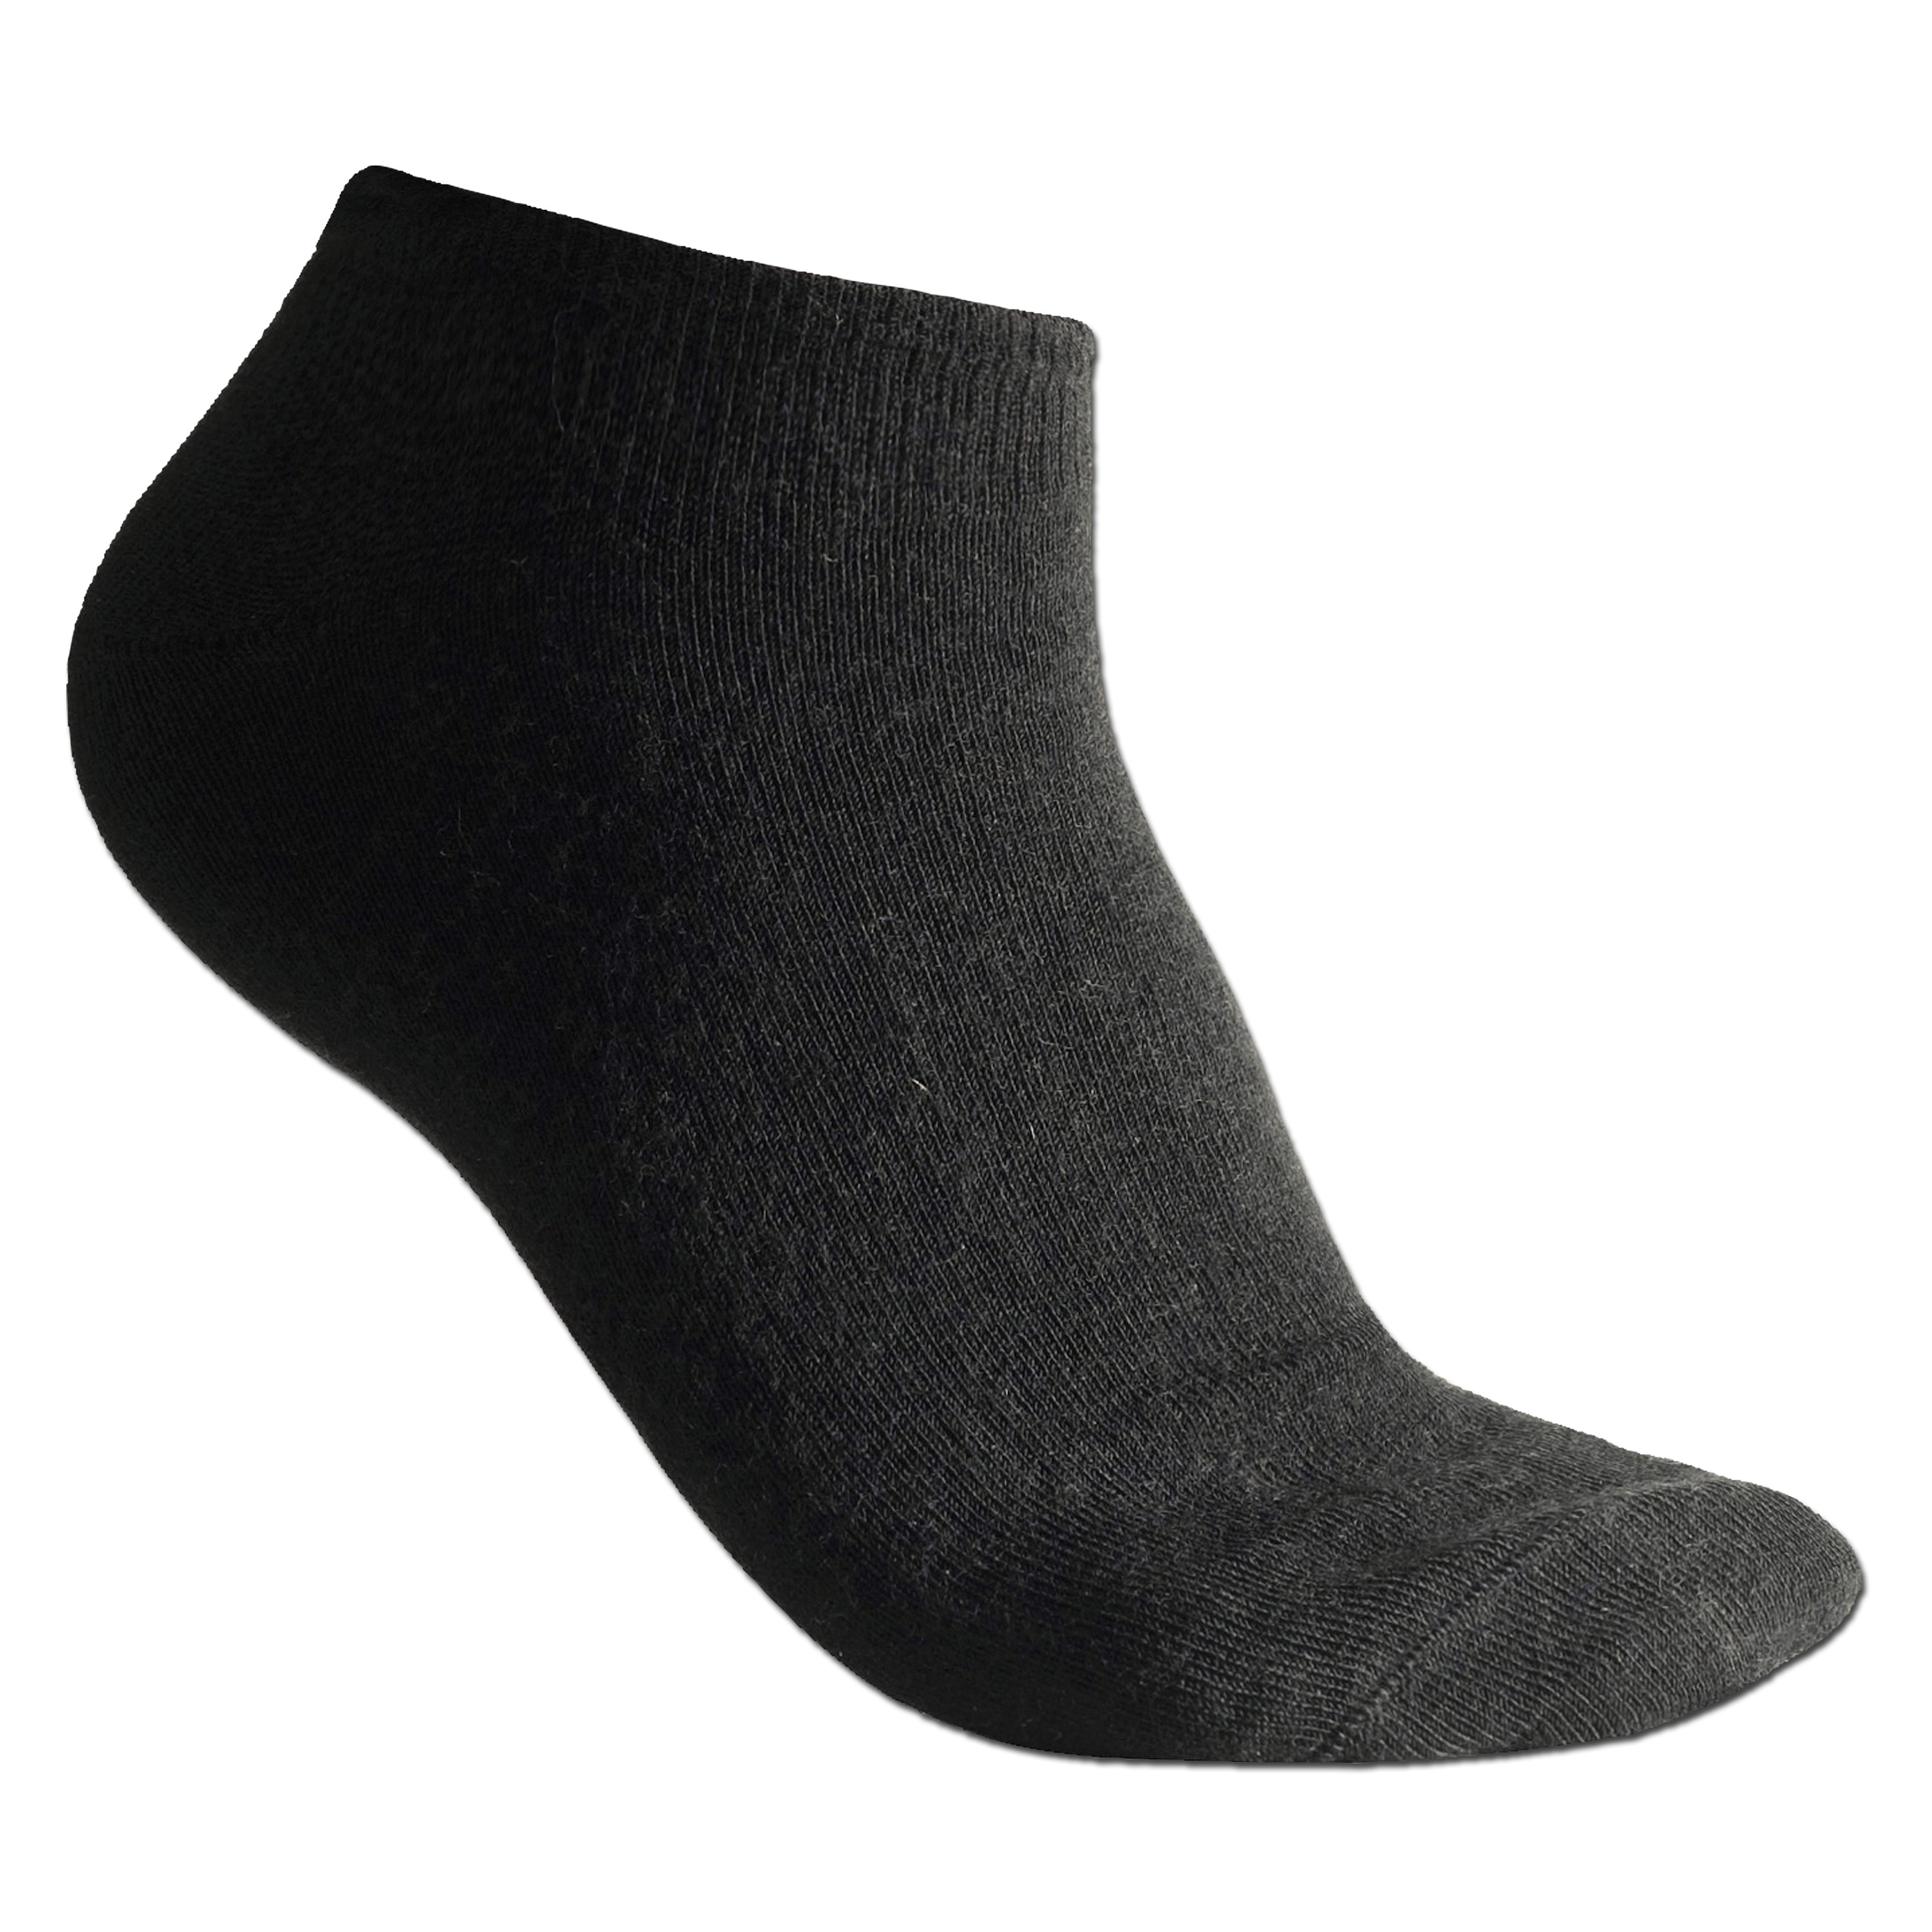 Purchase the Woolpower Sock Liner black by ASMC